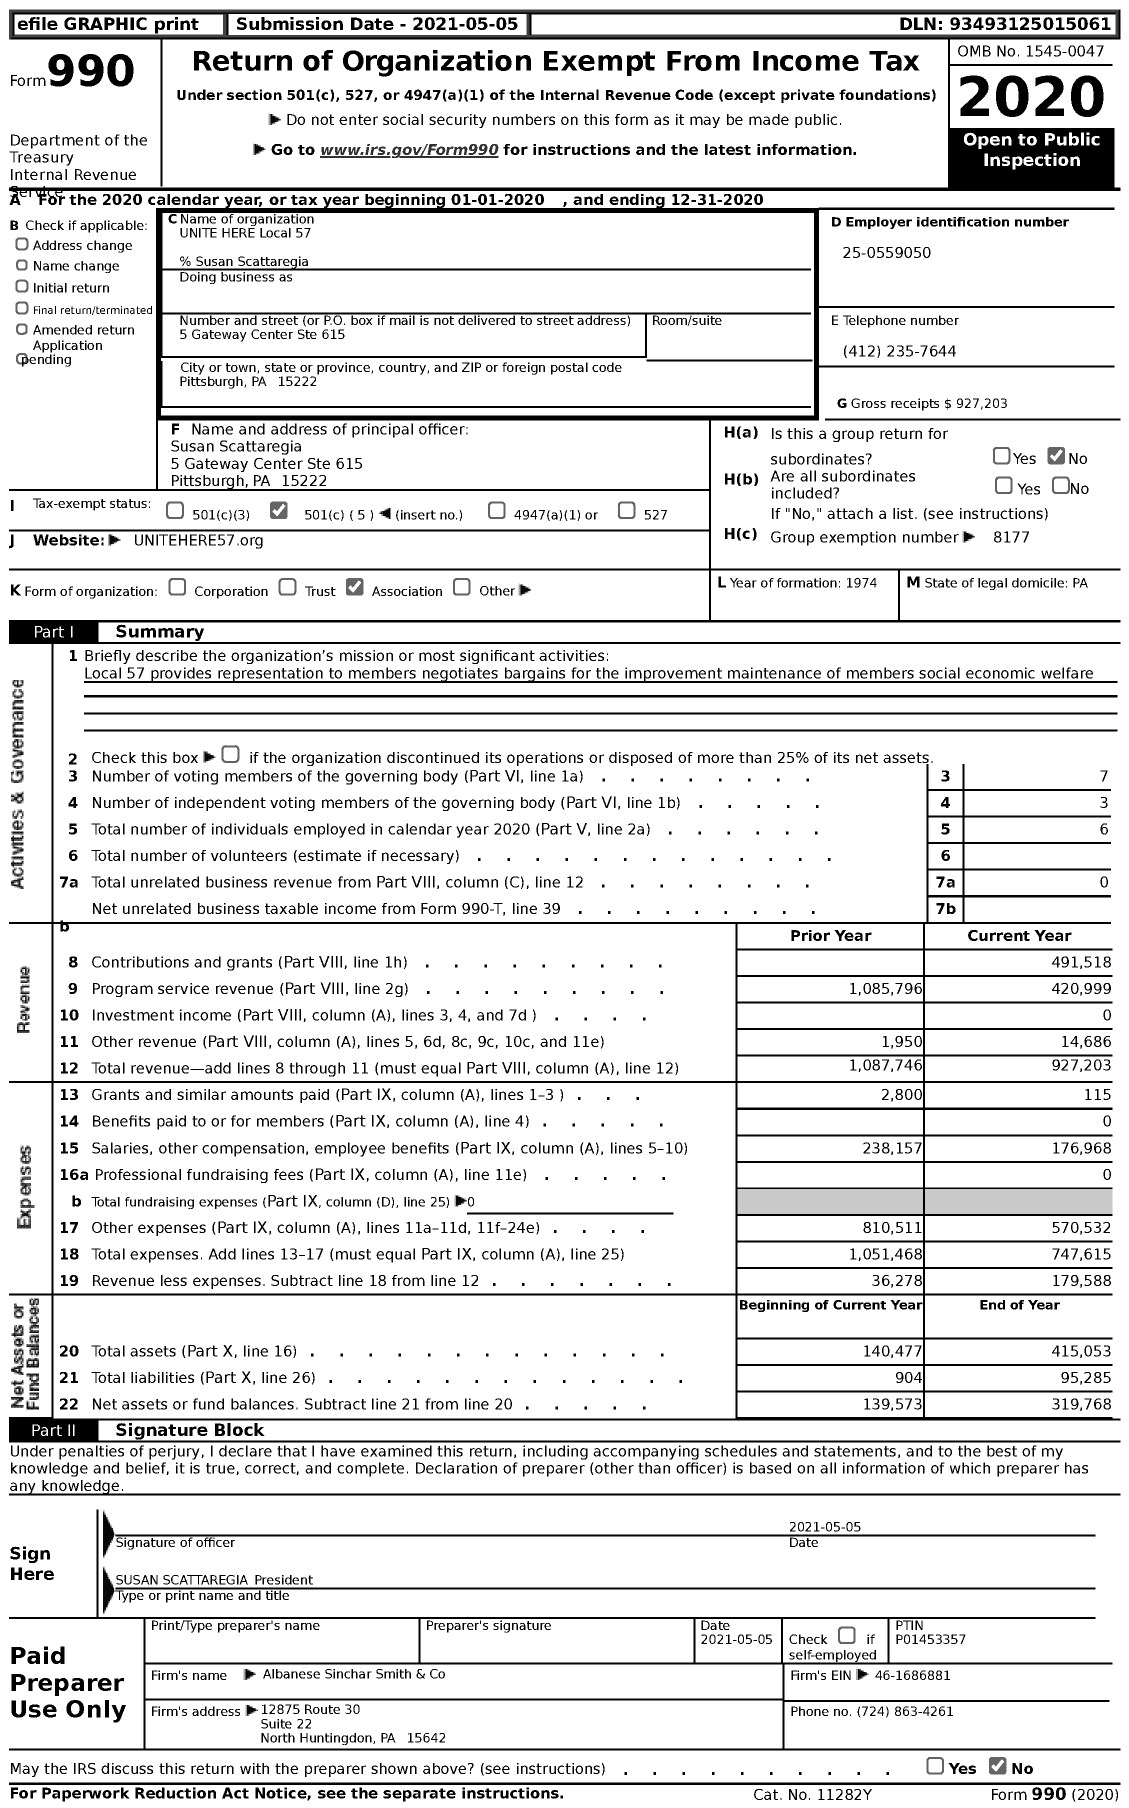 Image of first page of 2020 Form 990 for UNITE HERE - 57 Local